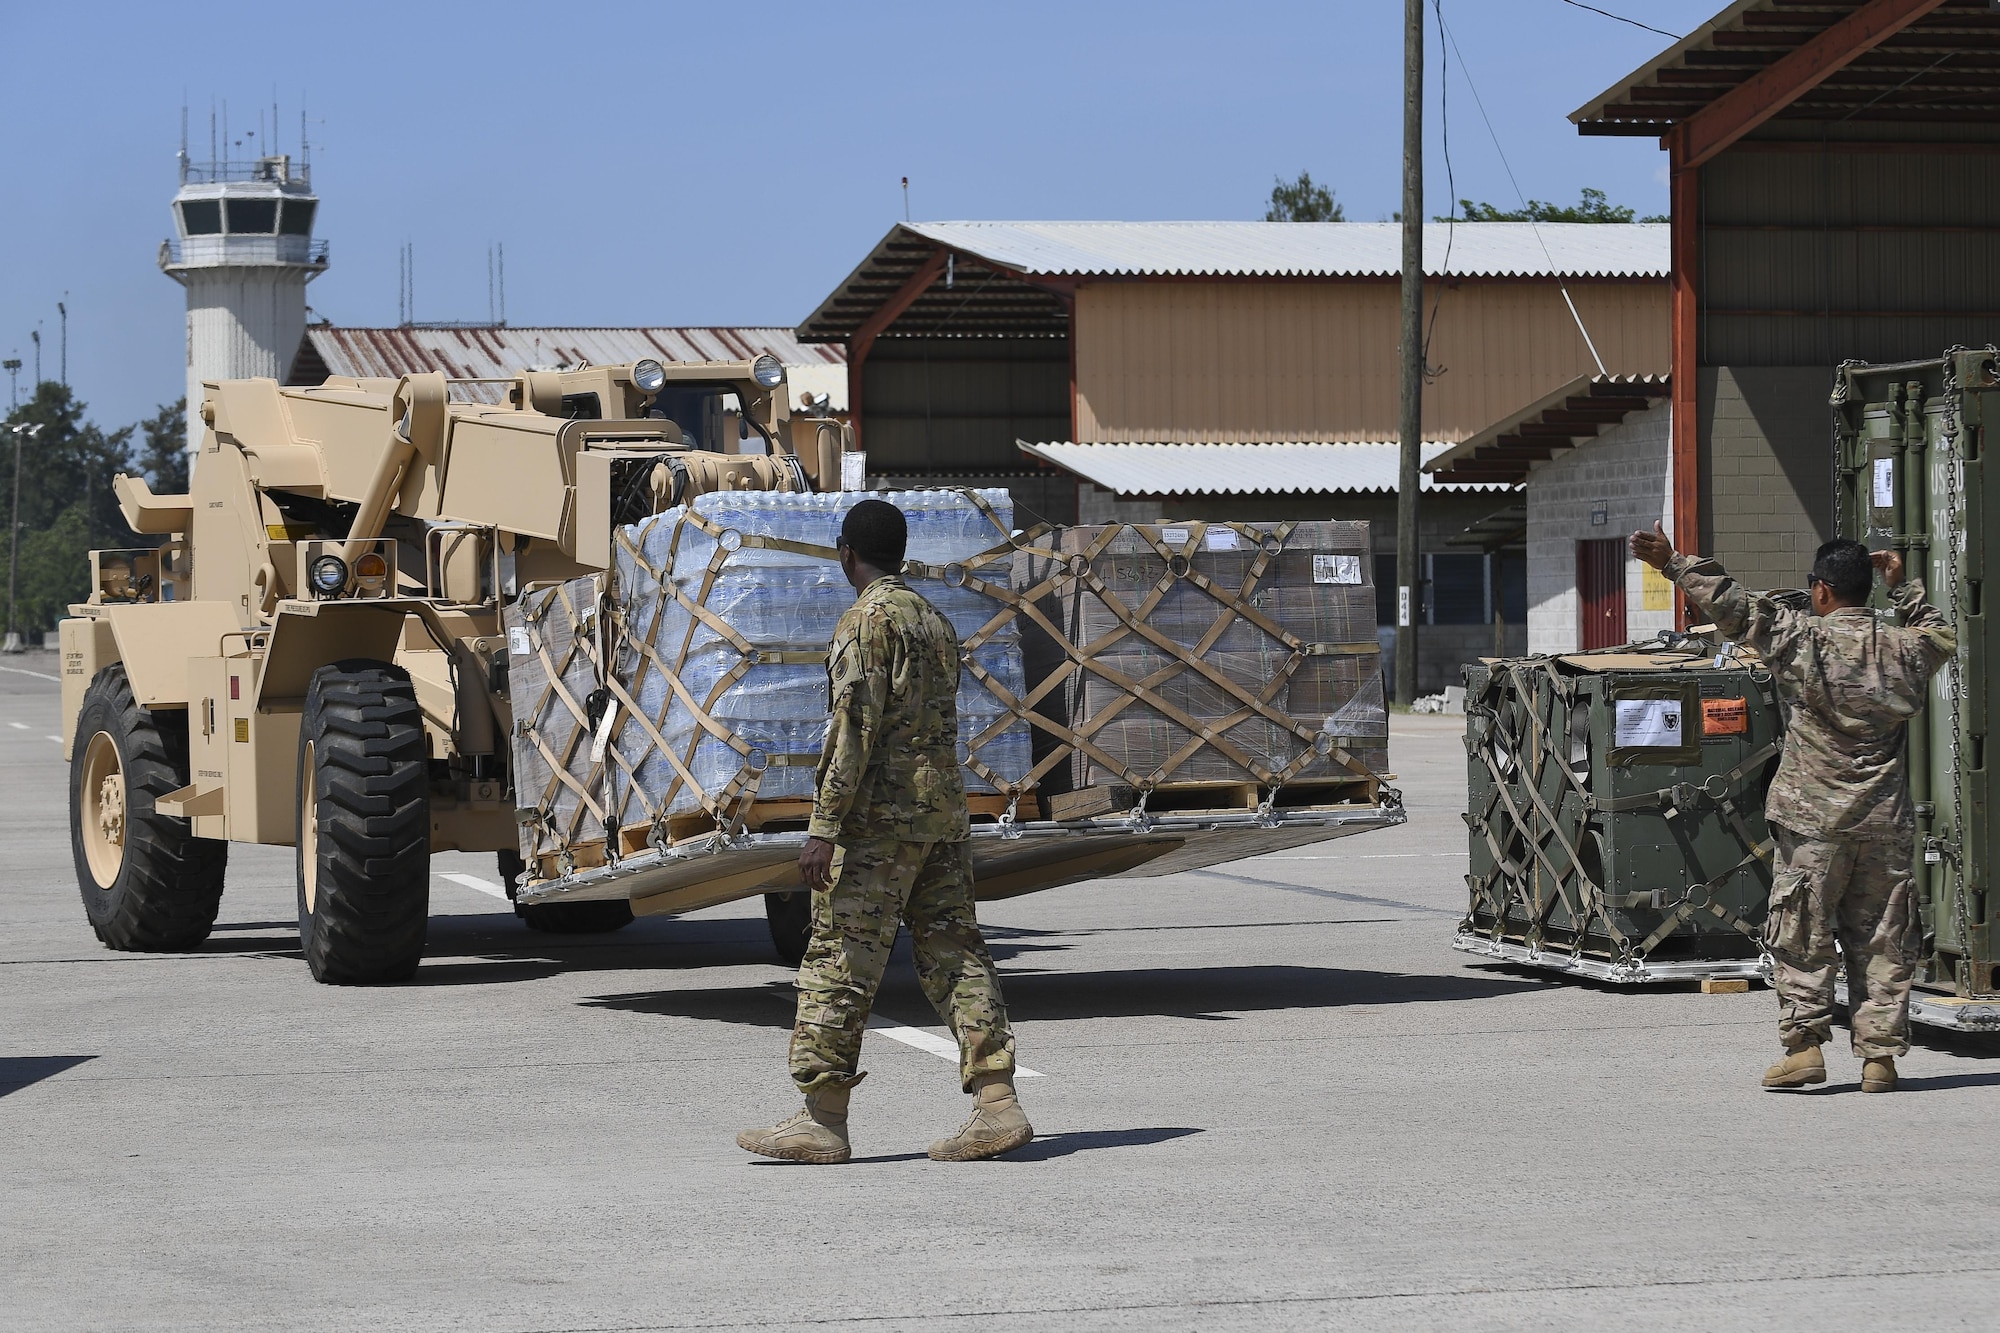 Members of Joint Task Force-Bravo stage supplies at Soto Cano Air Base, Honduras, Oct. 6, 2016, prior to loading onto an aircraft headed to Haiti to support the ongoing Hurricane Matthew disaster relief efforts. As nine helicopters assigned to Special Purpose Marine Air-Ground Task Force-Southern Command and JTF-Bravo deployed Oct. 4 and 5 with personnel and supplies, multiple mobility aircraft followed picking up pallets from Soto Cano AB to sustain Hurricane Matthew disaster relief operations in Haiti.